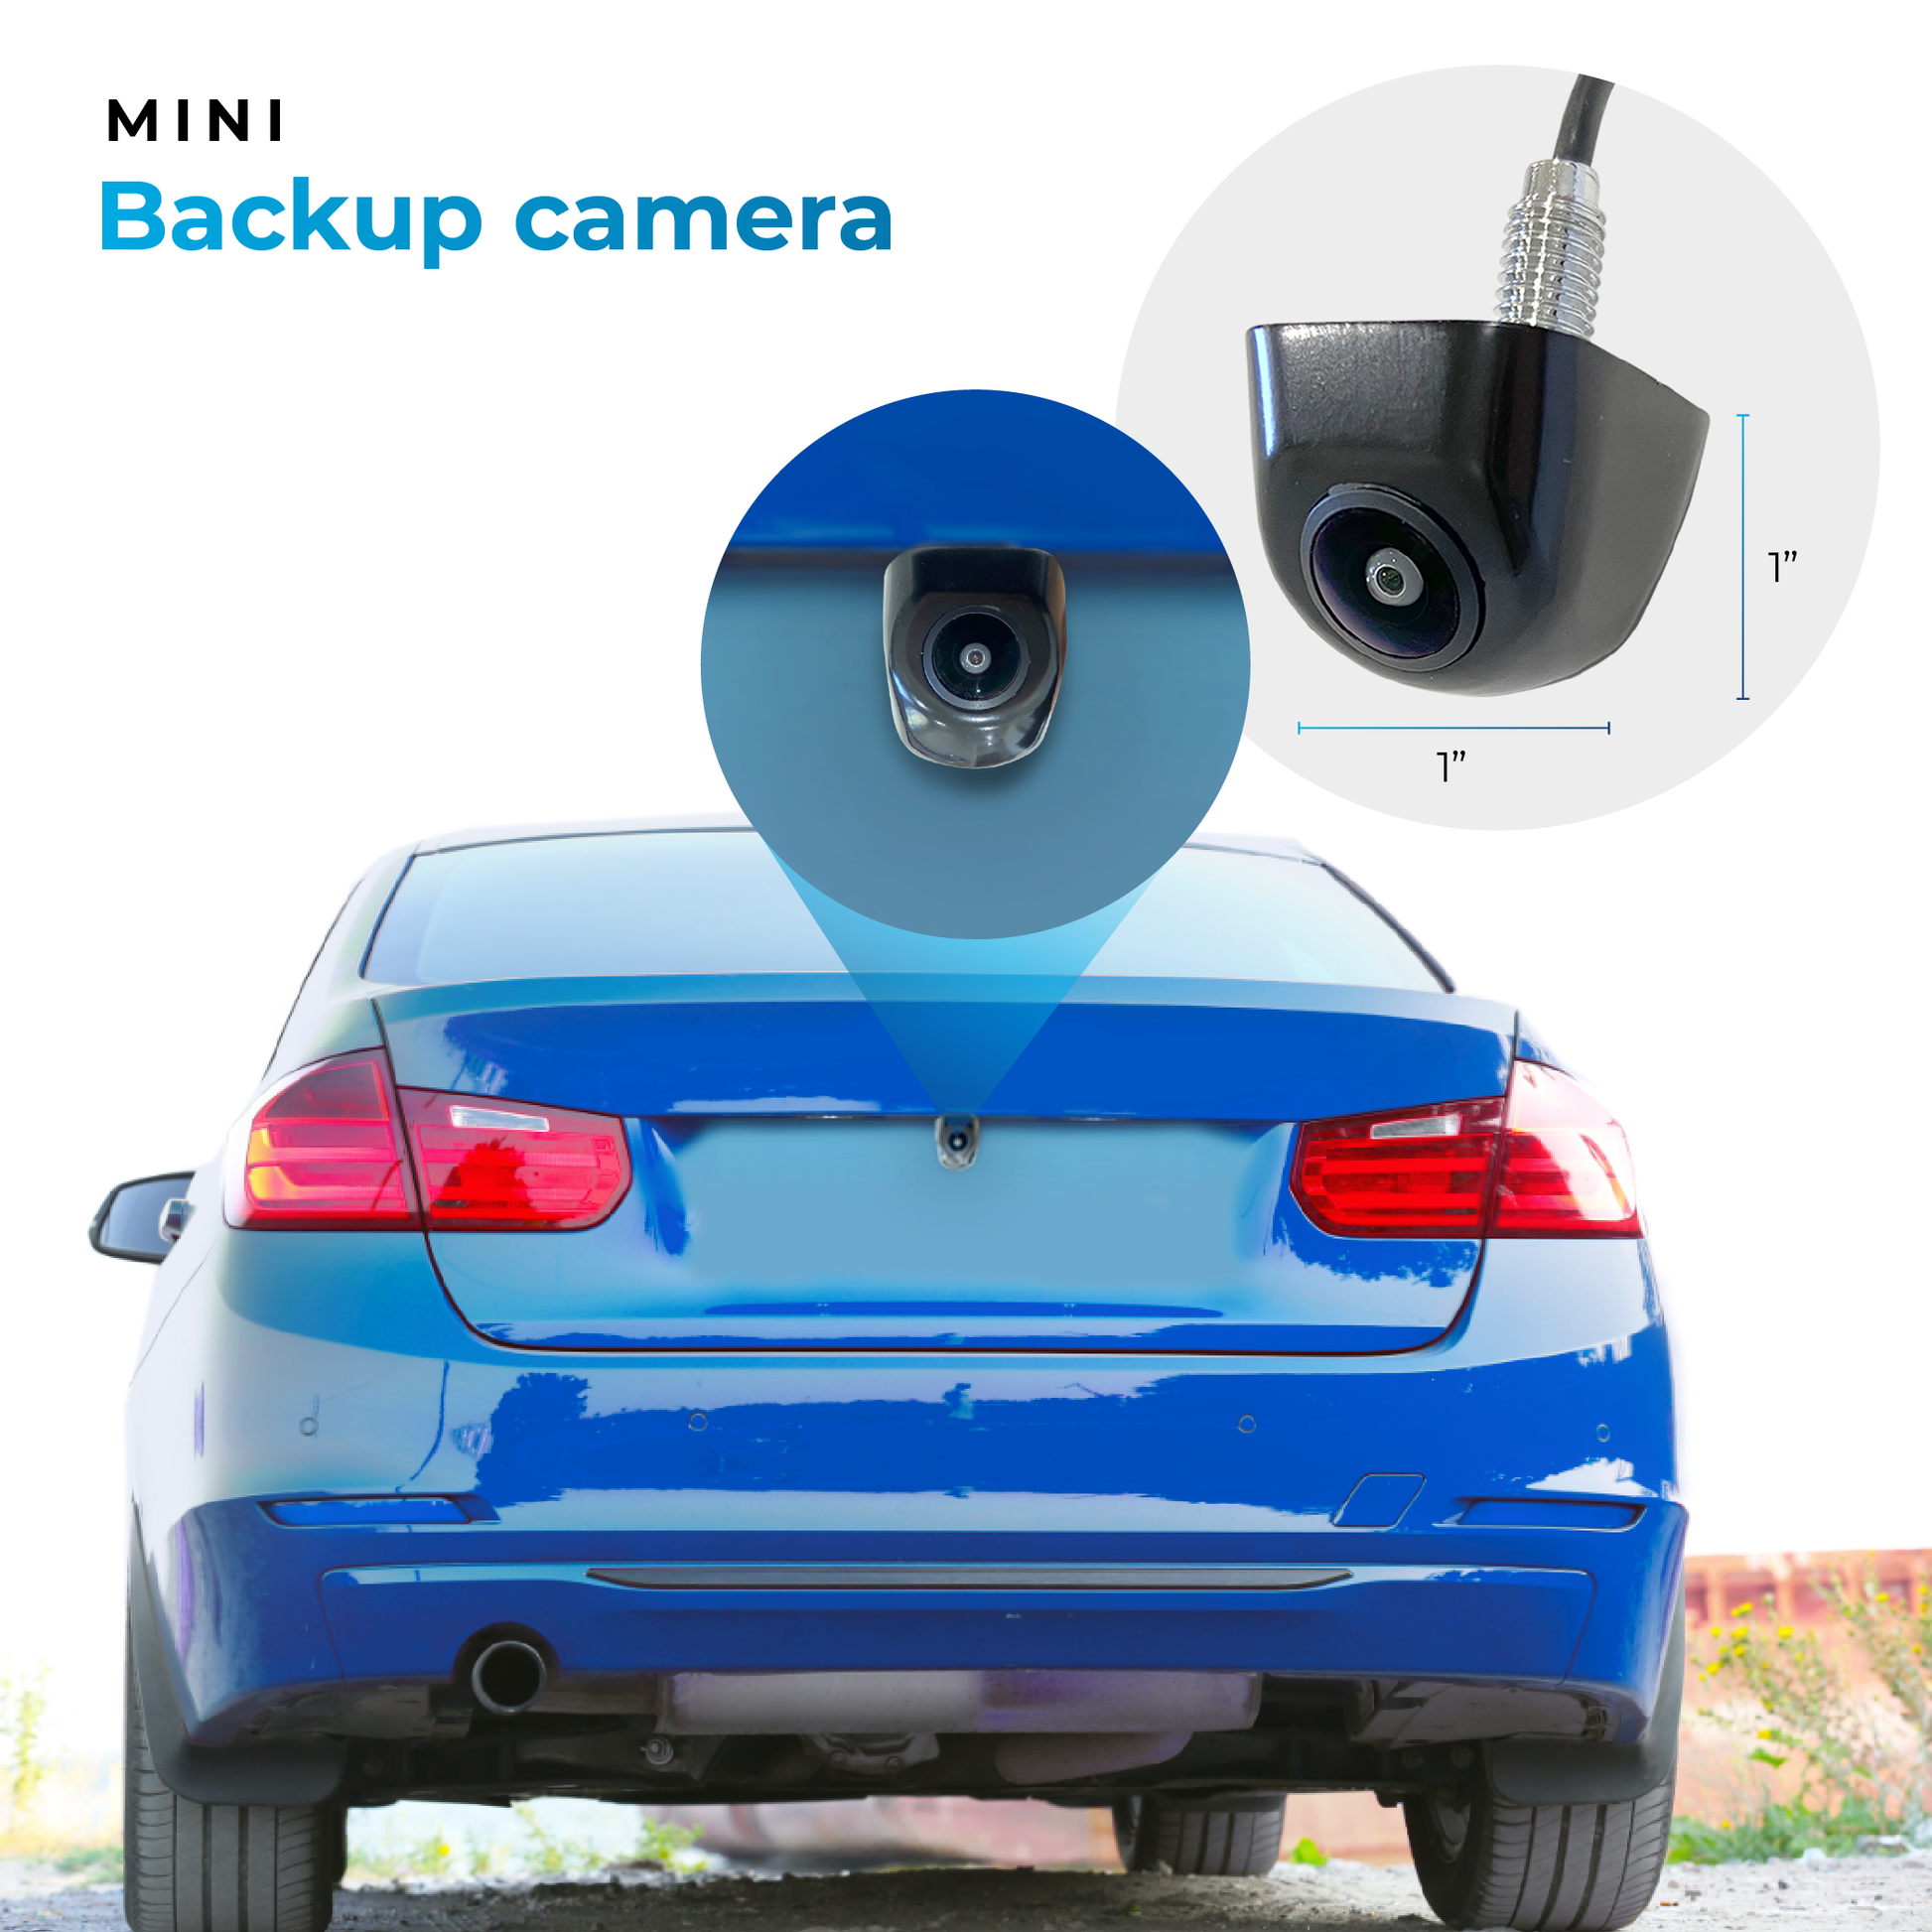 mini backup camera AutoSky HD Back up Camera - Metal OEM Style housing, Waterproof, Night Vision and Ultra Wide Angle2 